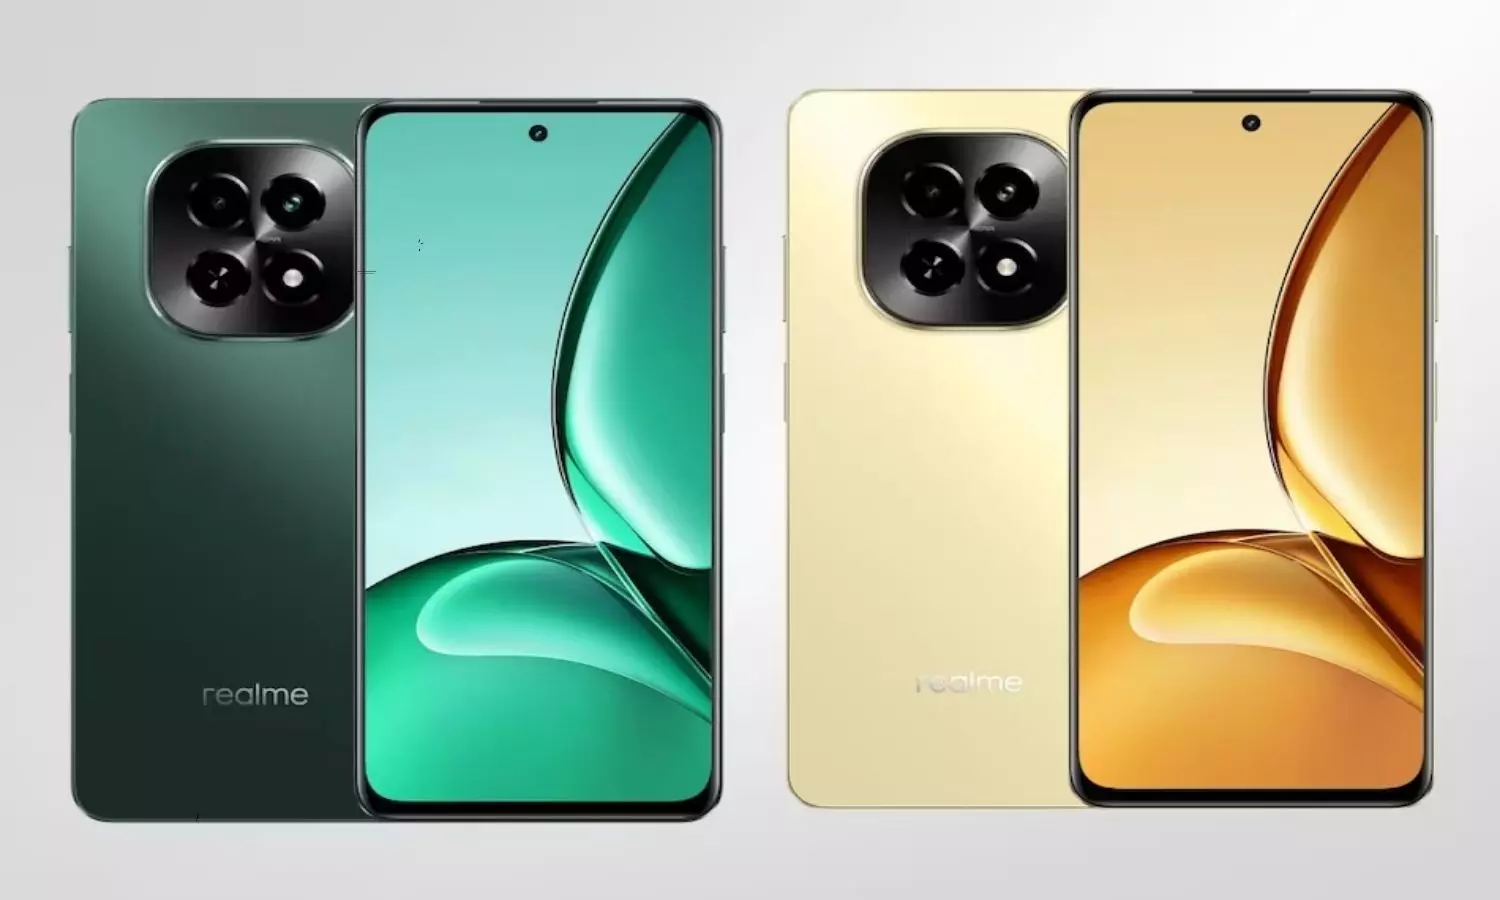 Realme launches new smart phone Realme v60 series in china, check here for features and price details